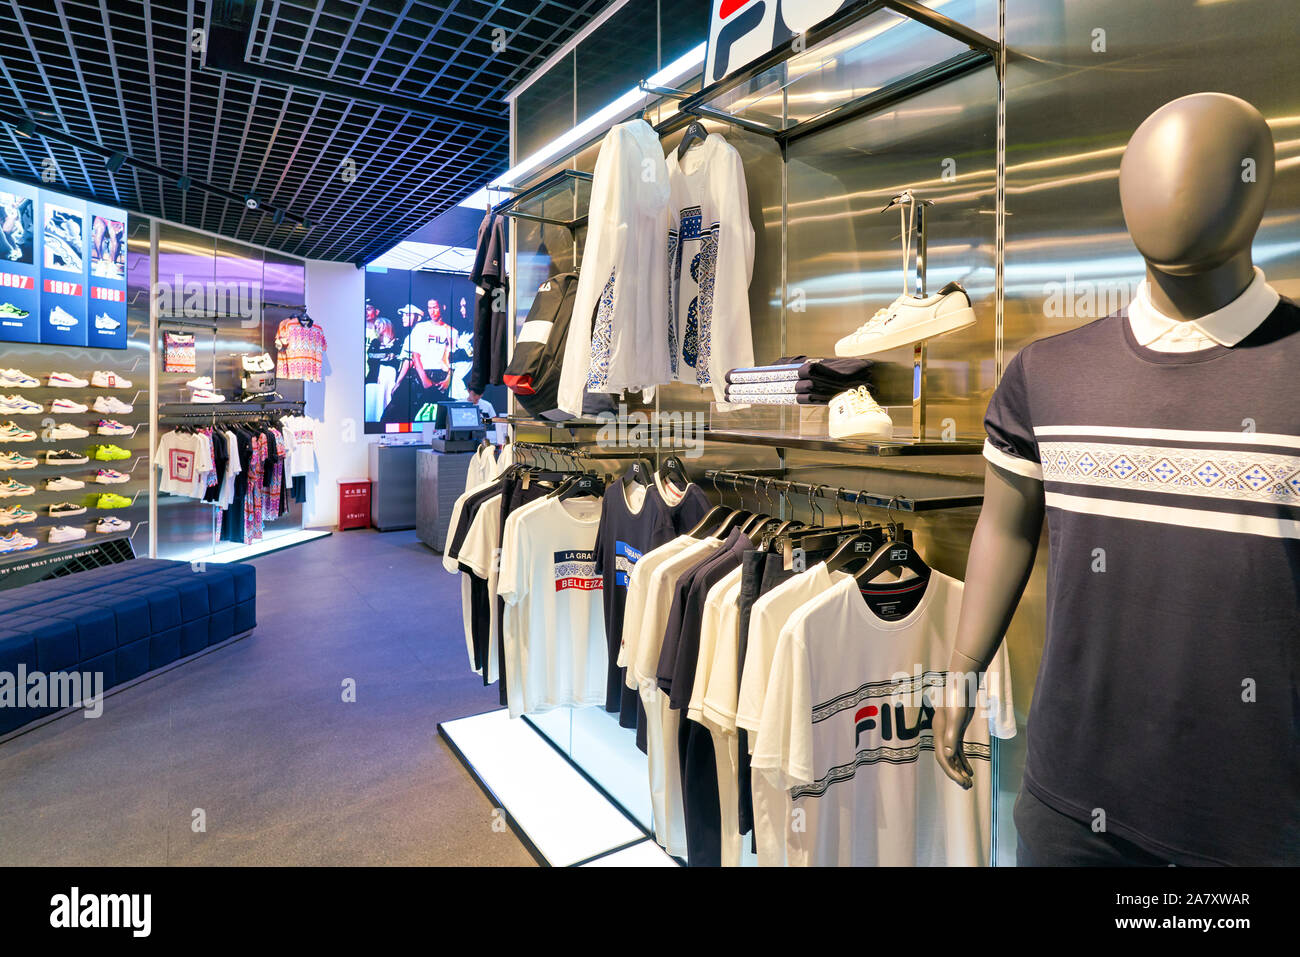 SHENZHEN, CHINA - CIRCA APRIL, 2019: interior shot of Fila store at a  shopping mall in Shenzhen. Fila is an Italian sporting goods brand and  company Stock Photo - Alamy